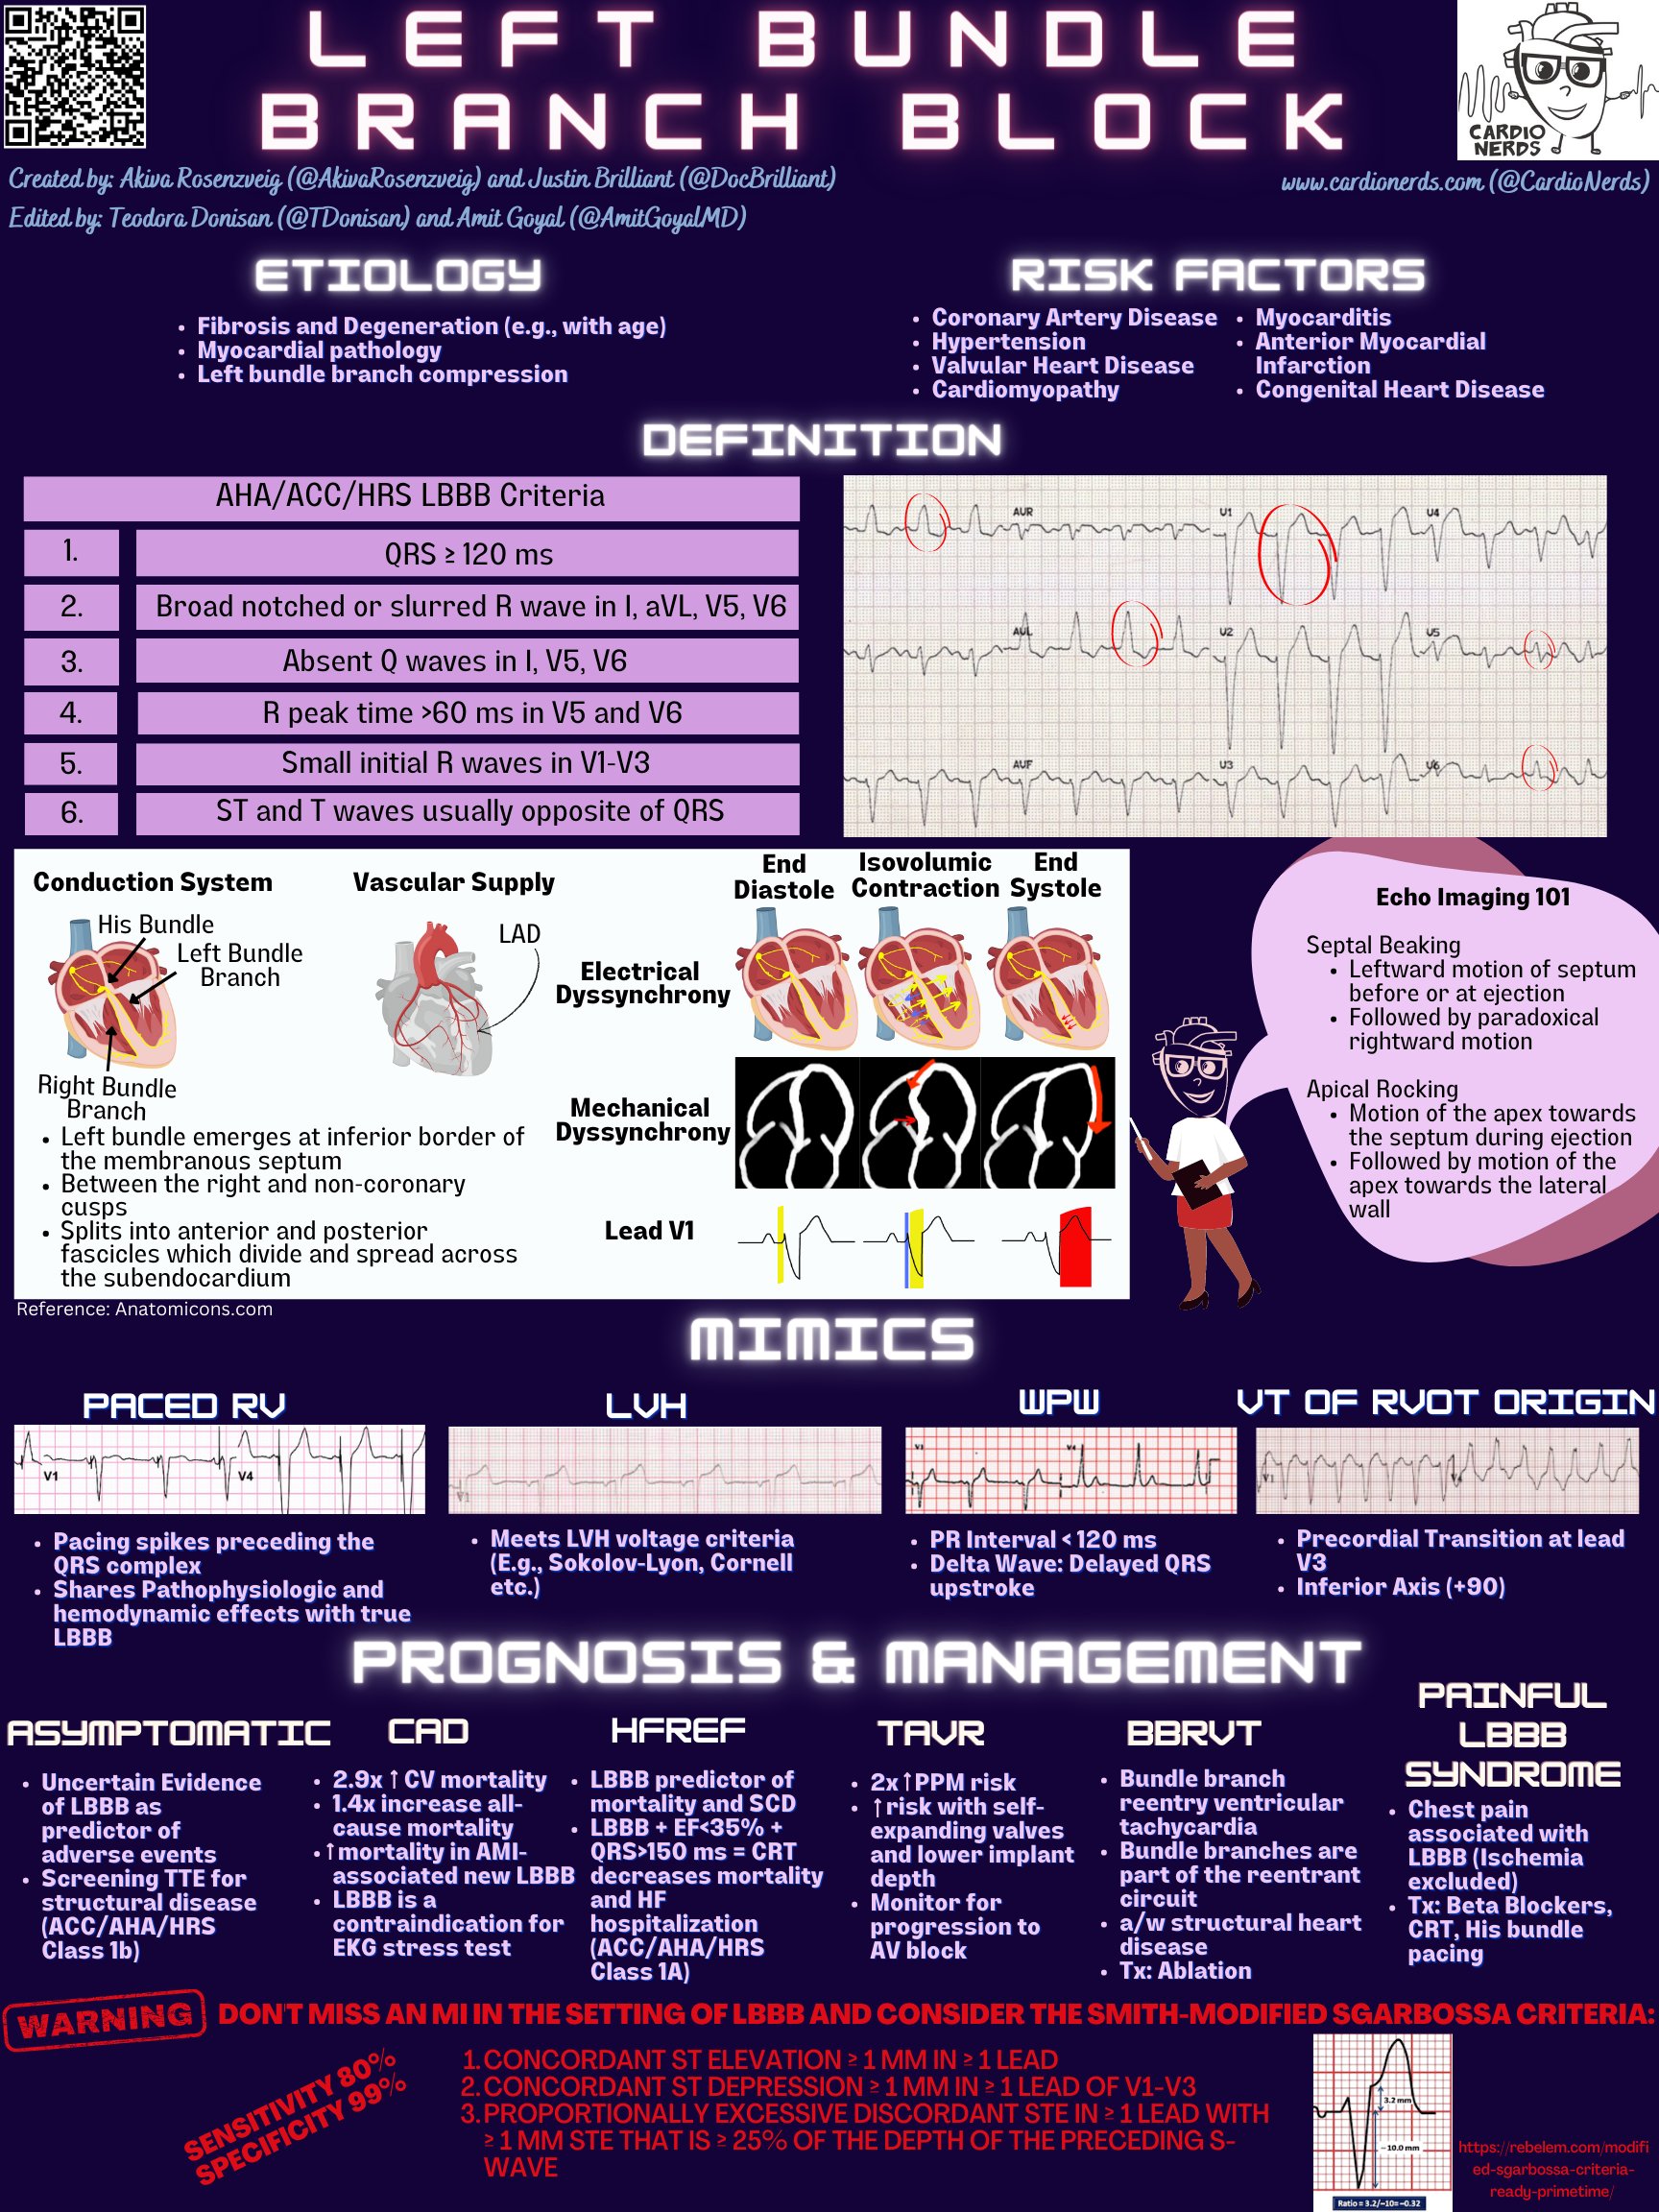 Akiva Rosenzveig on Twitter: "📢📢Need a refresher on bundle branch block and when we need to worry about it⁉️Check out this infographic brought to you by @Cardionerds and #HouseThomas ⬇️⬇️⬇️ #CardioTwitter #